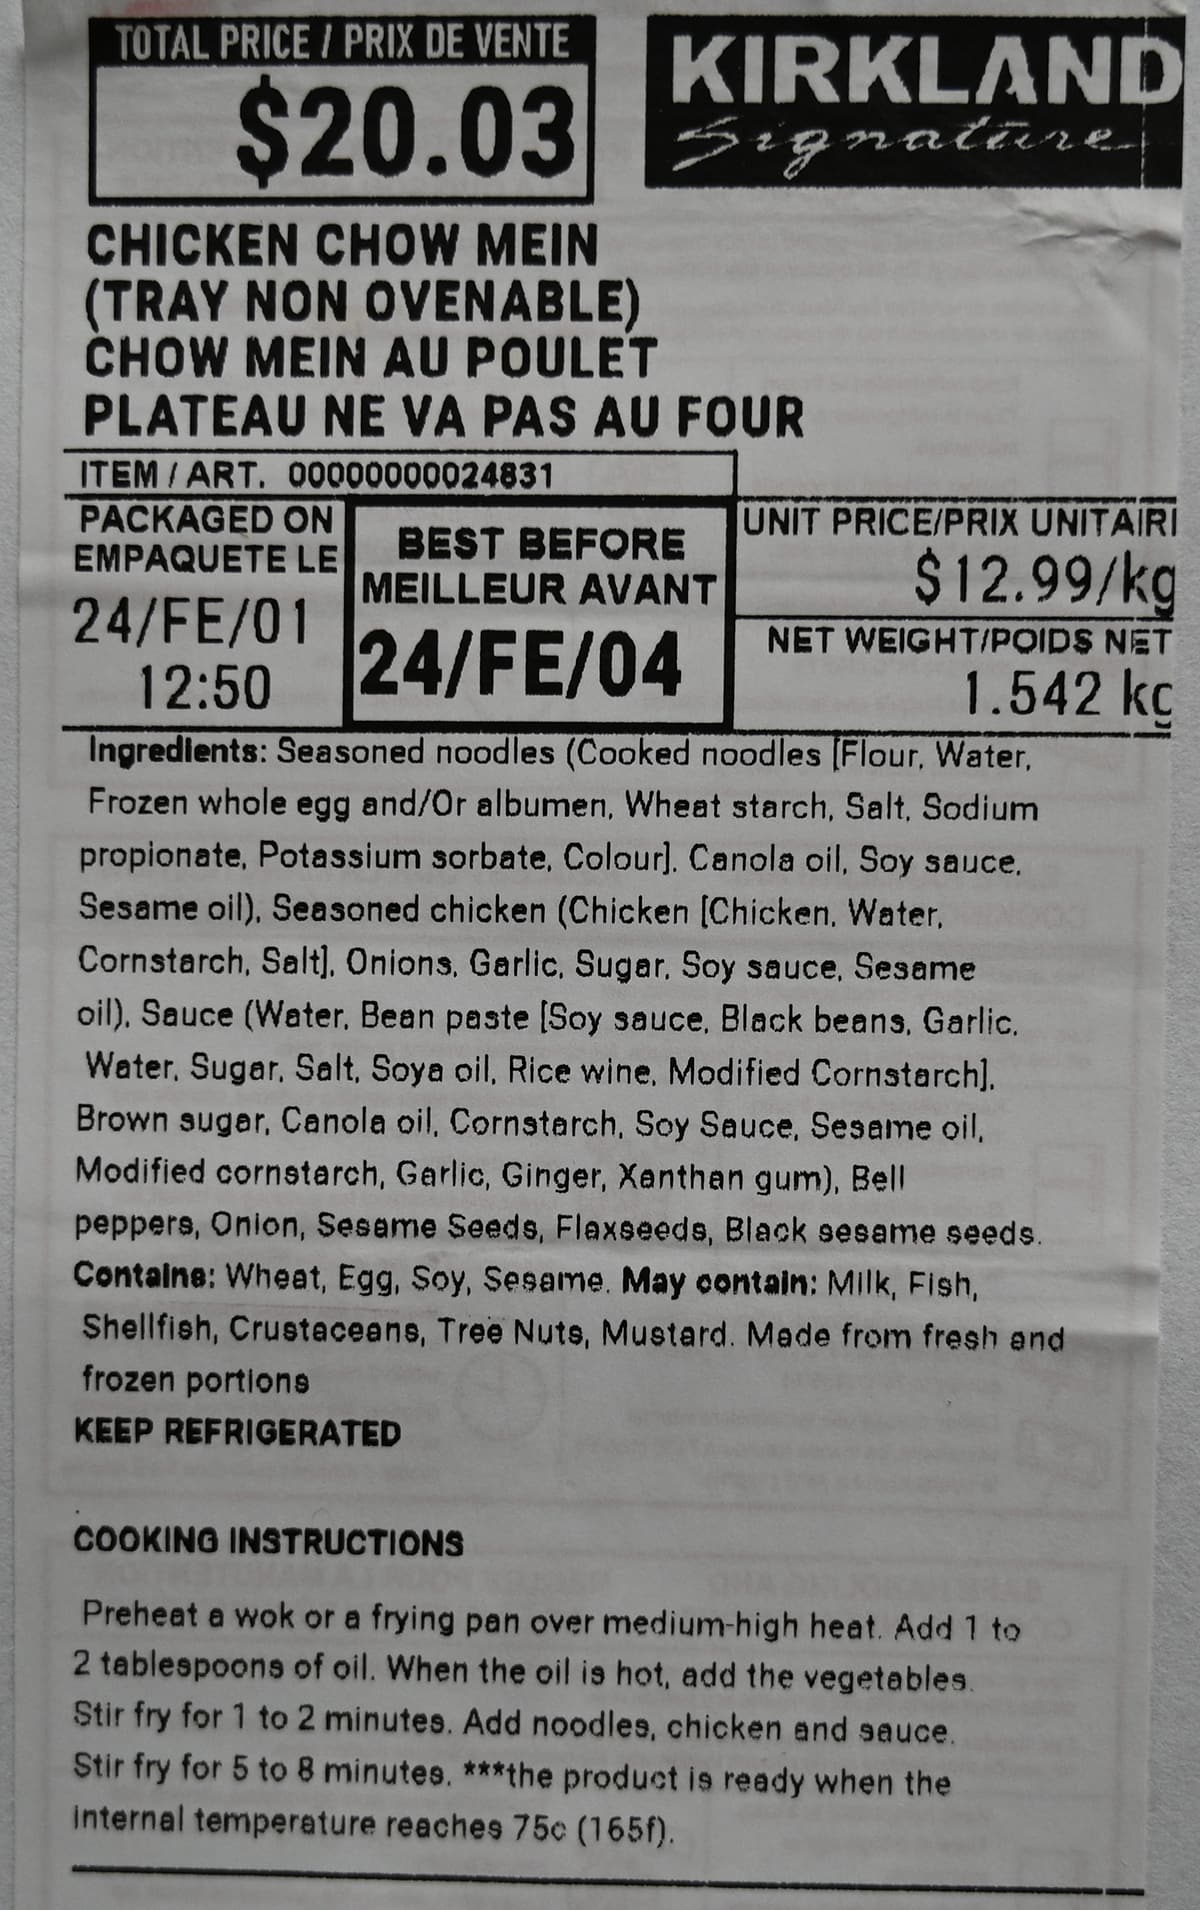 Closeup image of the front label on the Costco Chicken Chow Mein showing price, ingredients and cooking instructions.